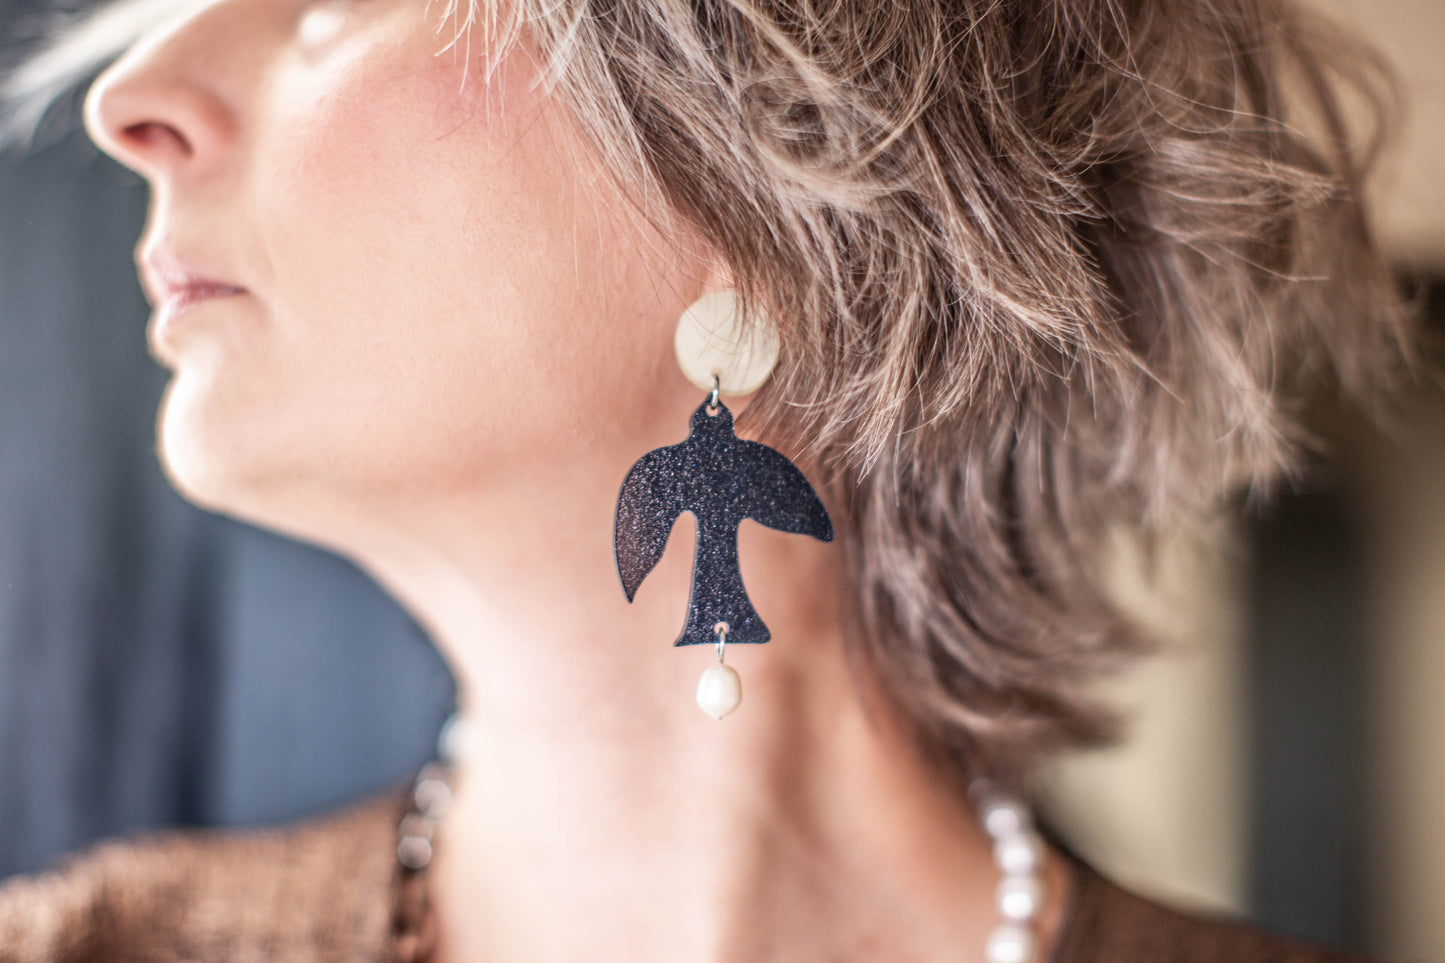 this is a picture of a woman profile we can't see the top of her face. she is wearing statement clip on earrings composed by a white dot (moon) and black glitter bird and a freshwater pearl. the background is blue and white.